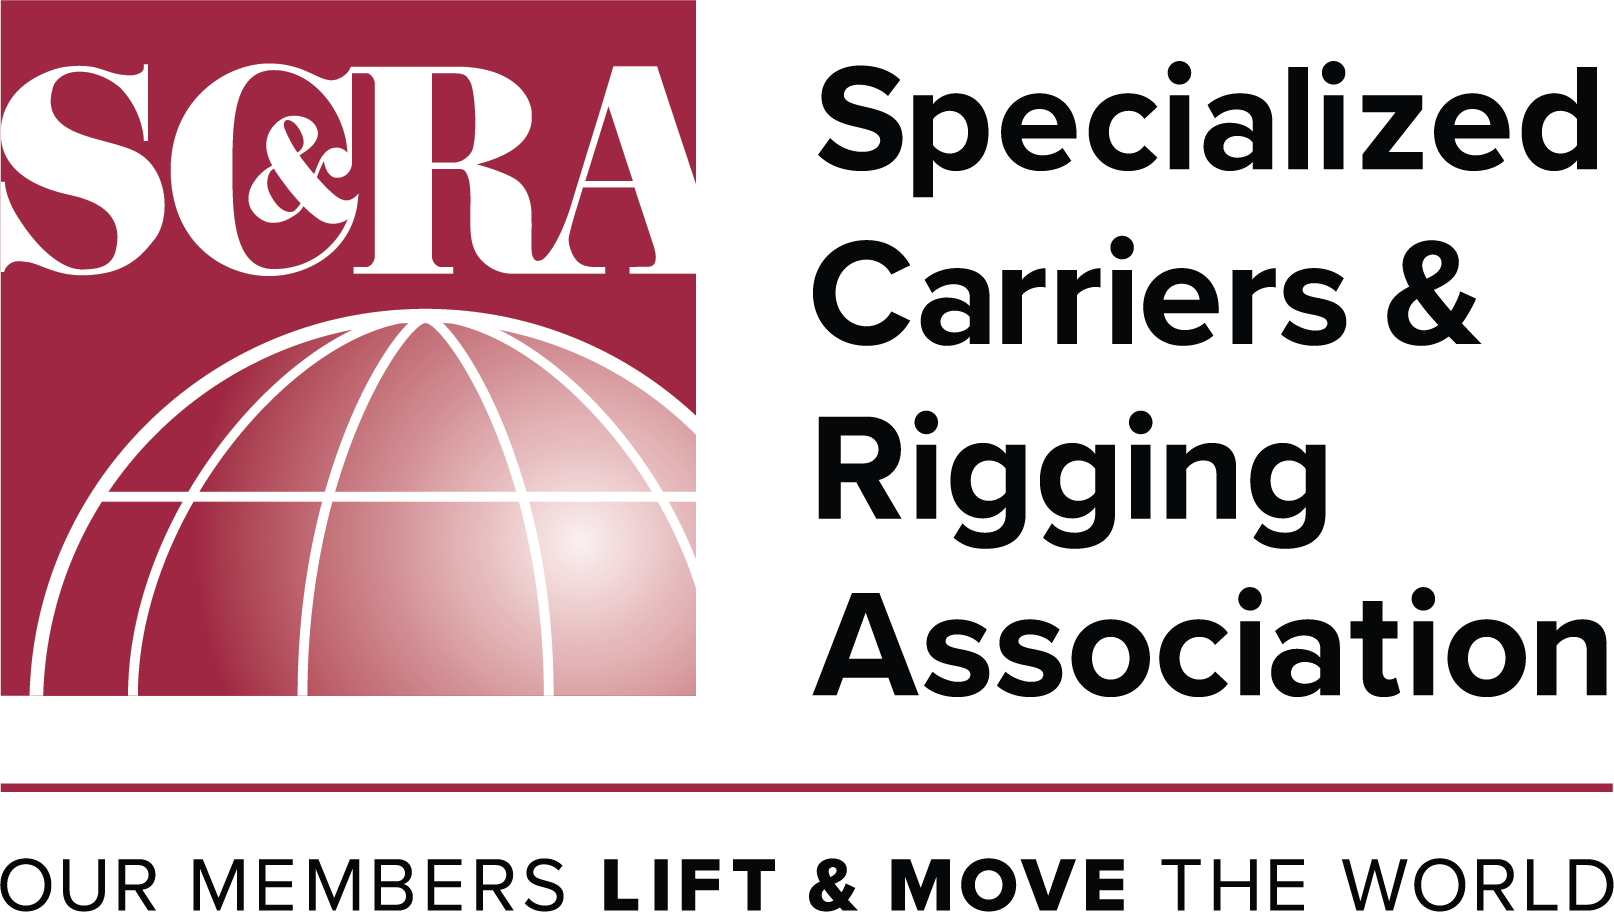 SC&RA Specialized Carriers & Rigging Association logo